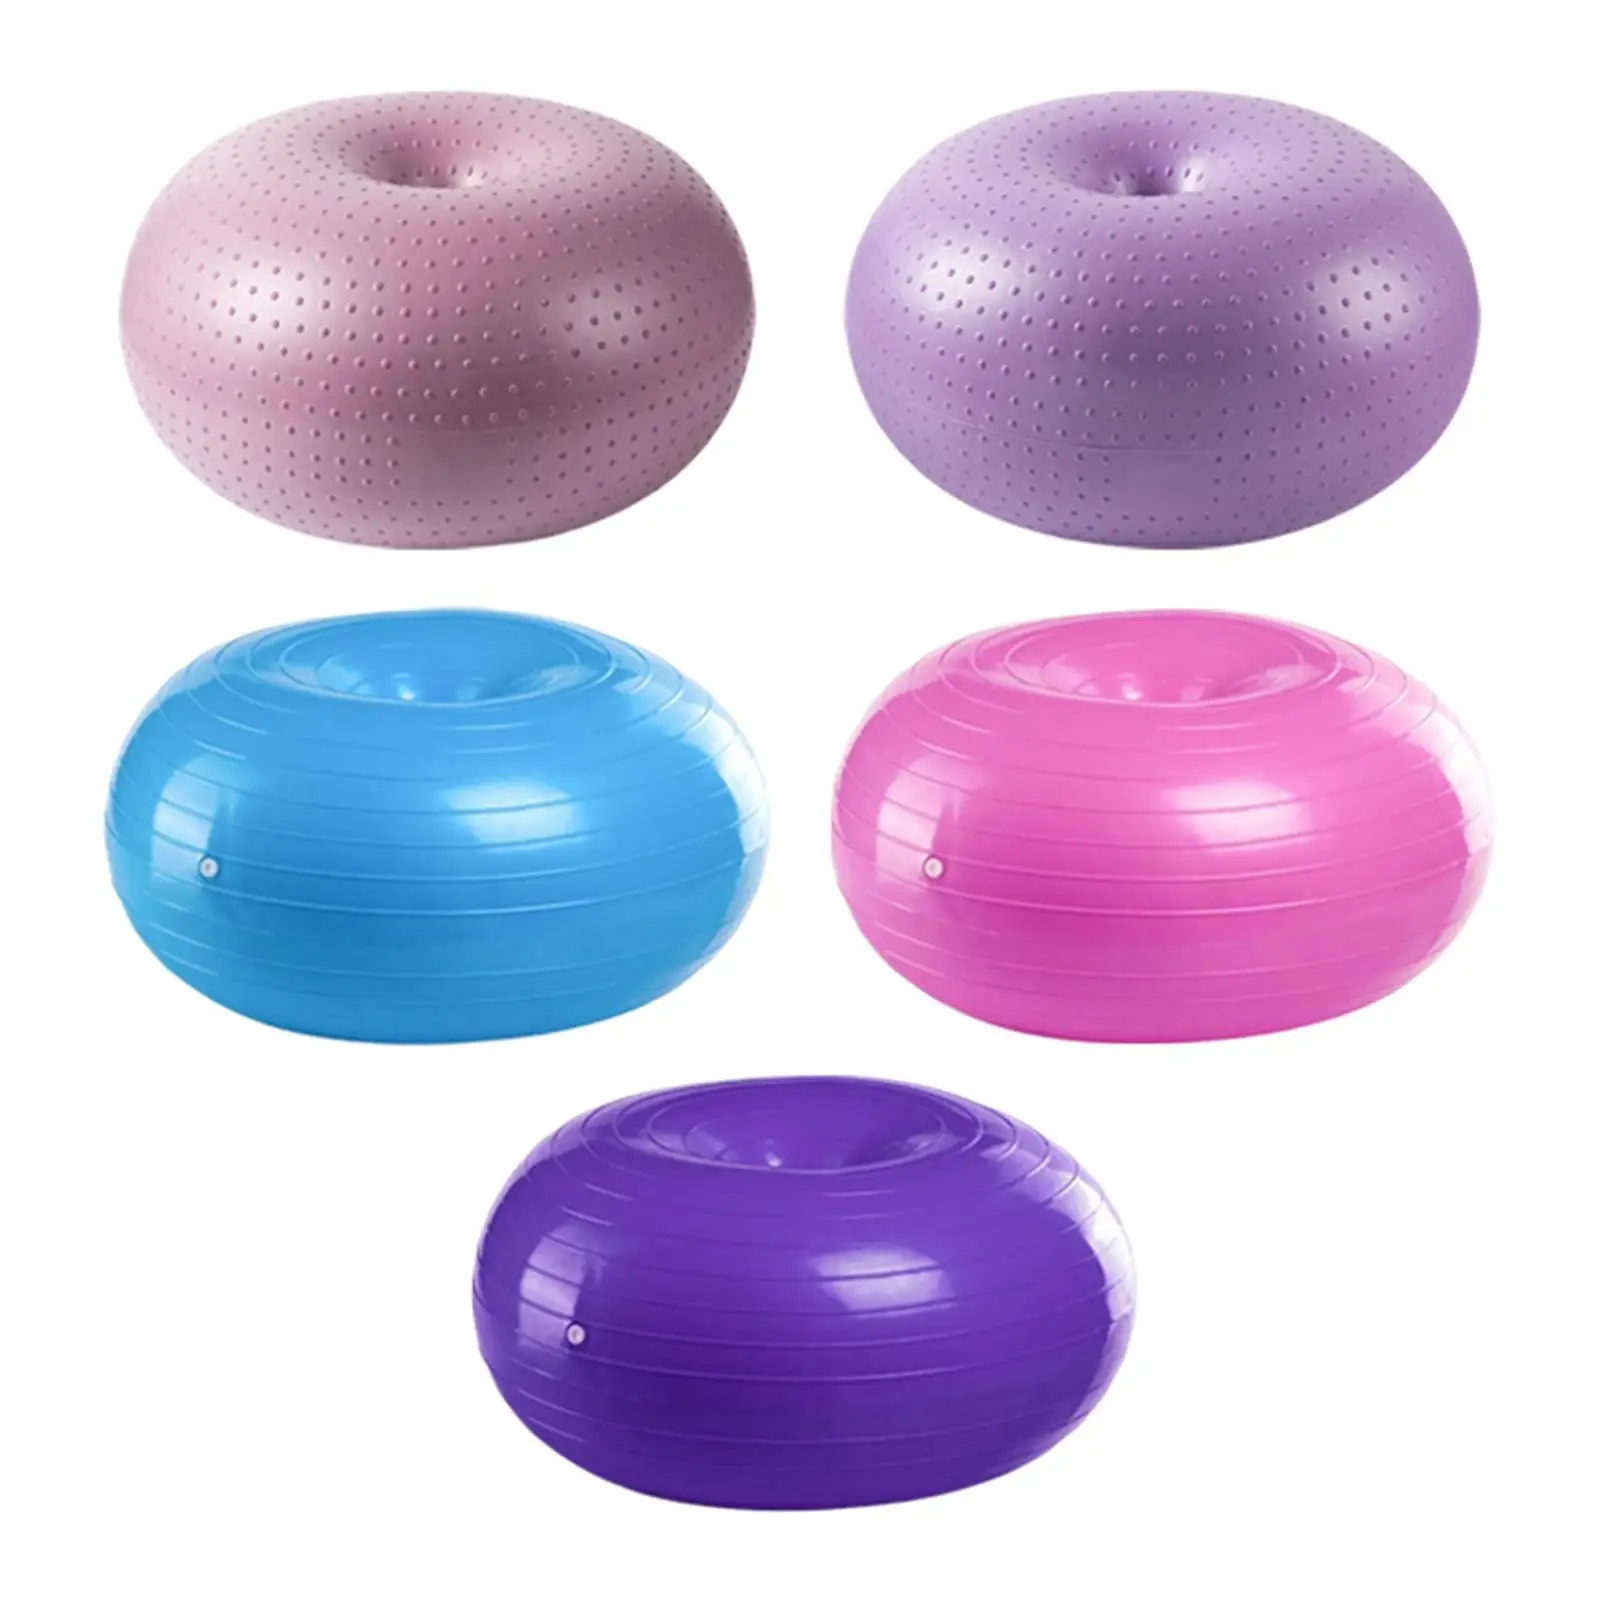 1PC Fitness Ball Anti-Blast Rhythmic Support Inflatable Aid Exercise Stability